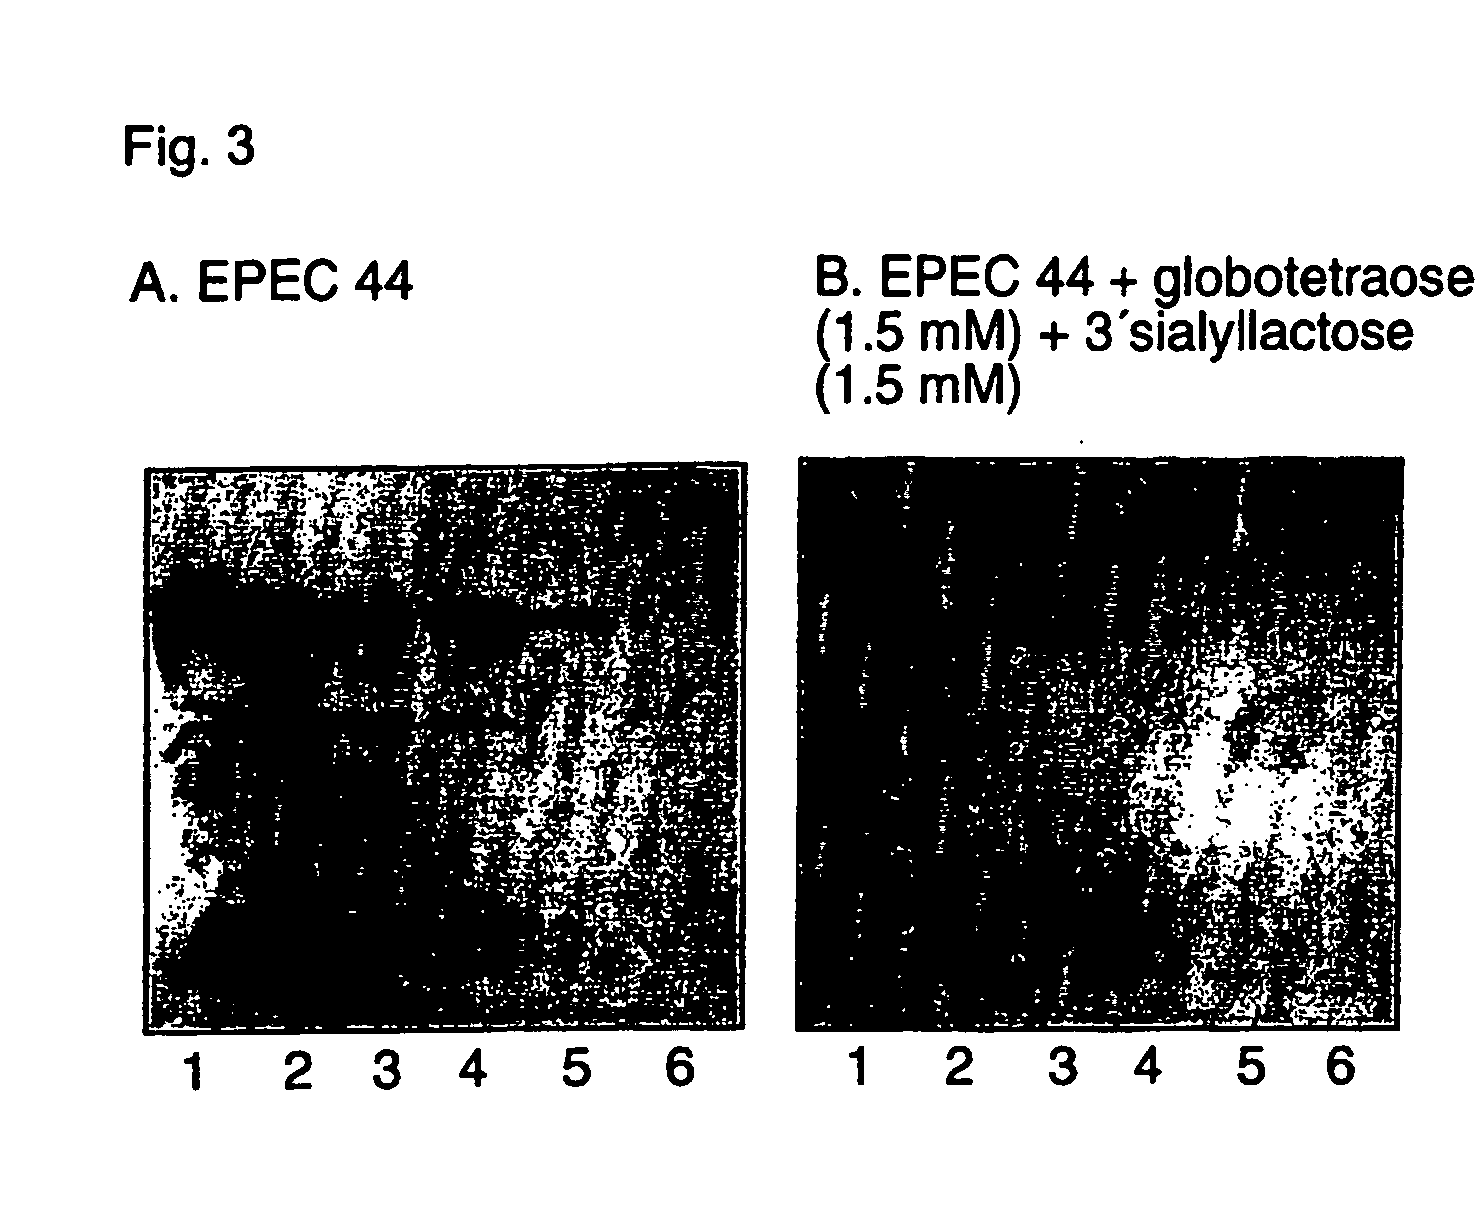 Therapeutic compositions for use in prophylaxis or treatment of diarrheas